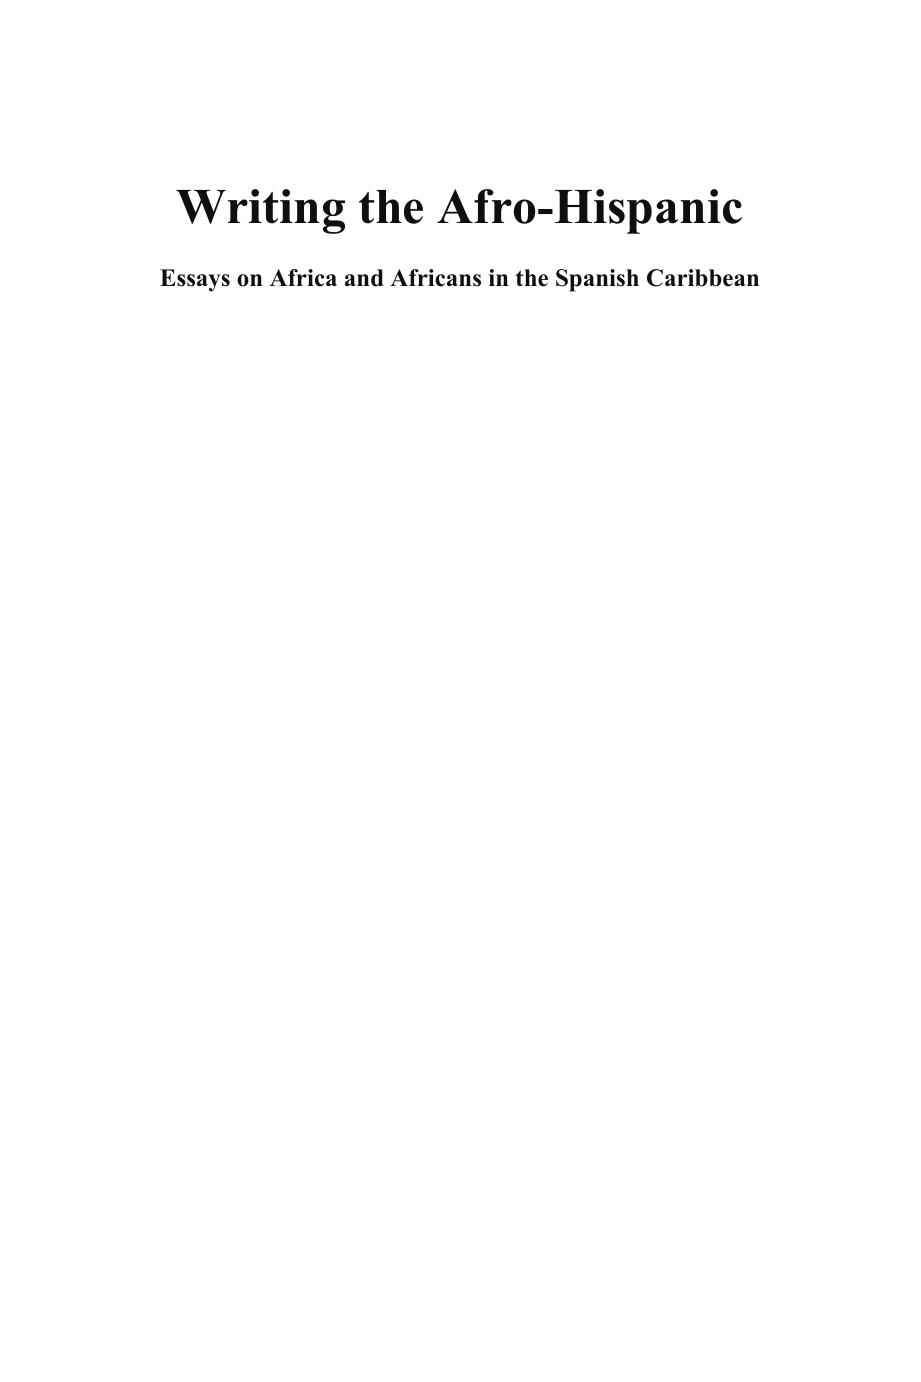 Writing the Afro-Hispanic : Essays on Africa and Africans in the Spanish Caribbean by Conrad James